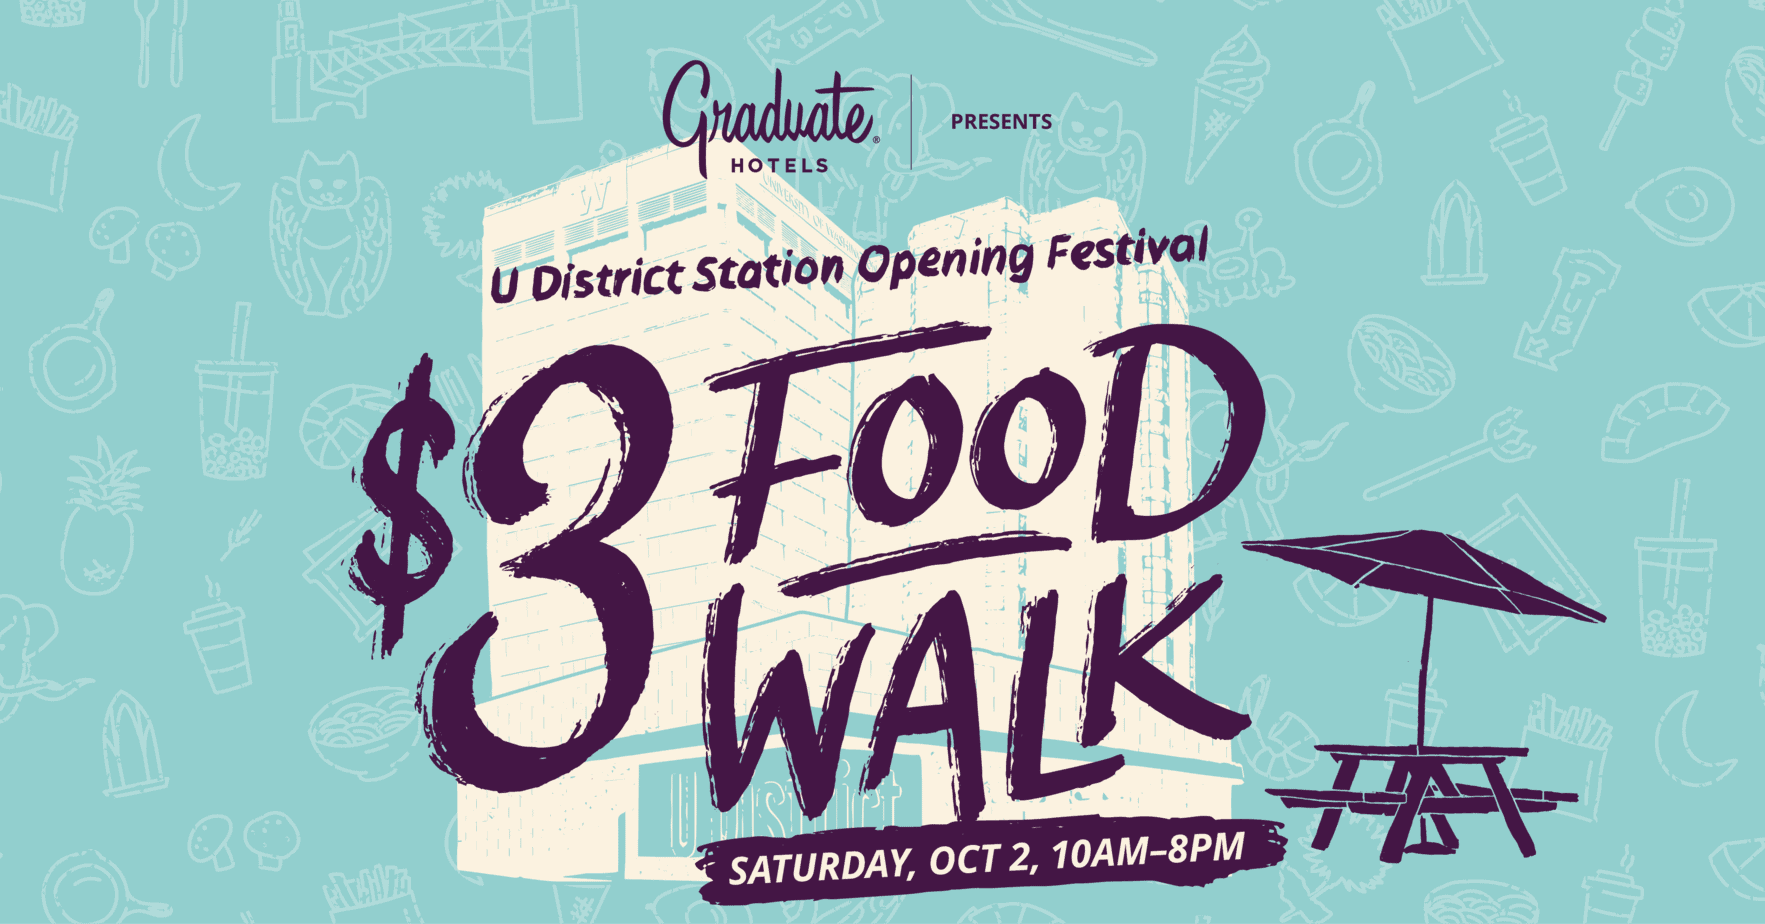 U District Station Opening Festival and $3 Food Walk